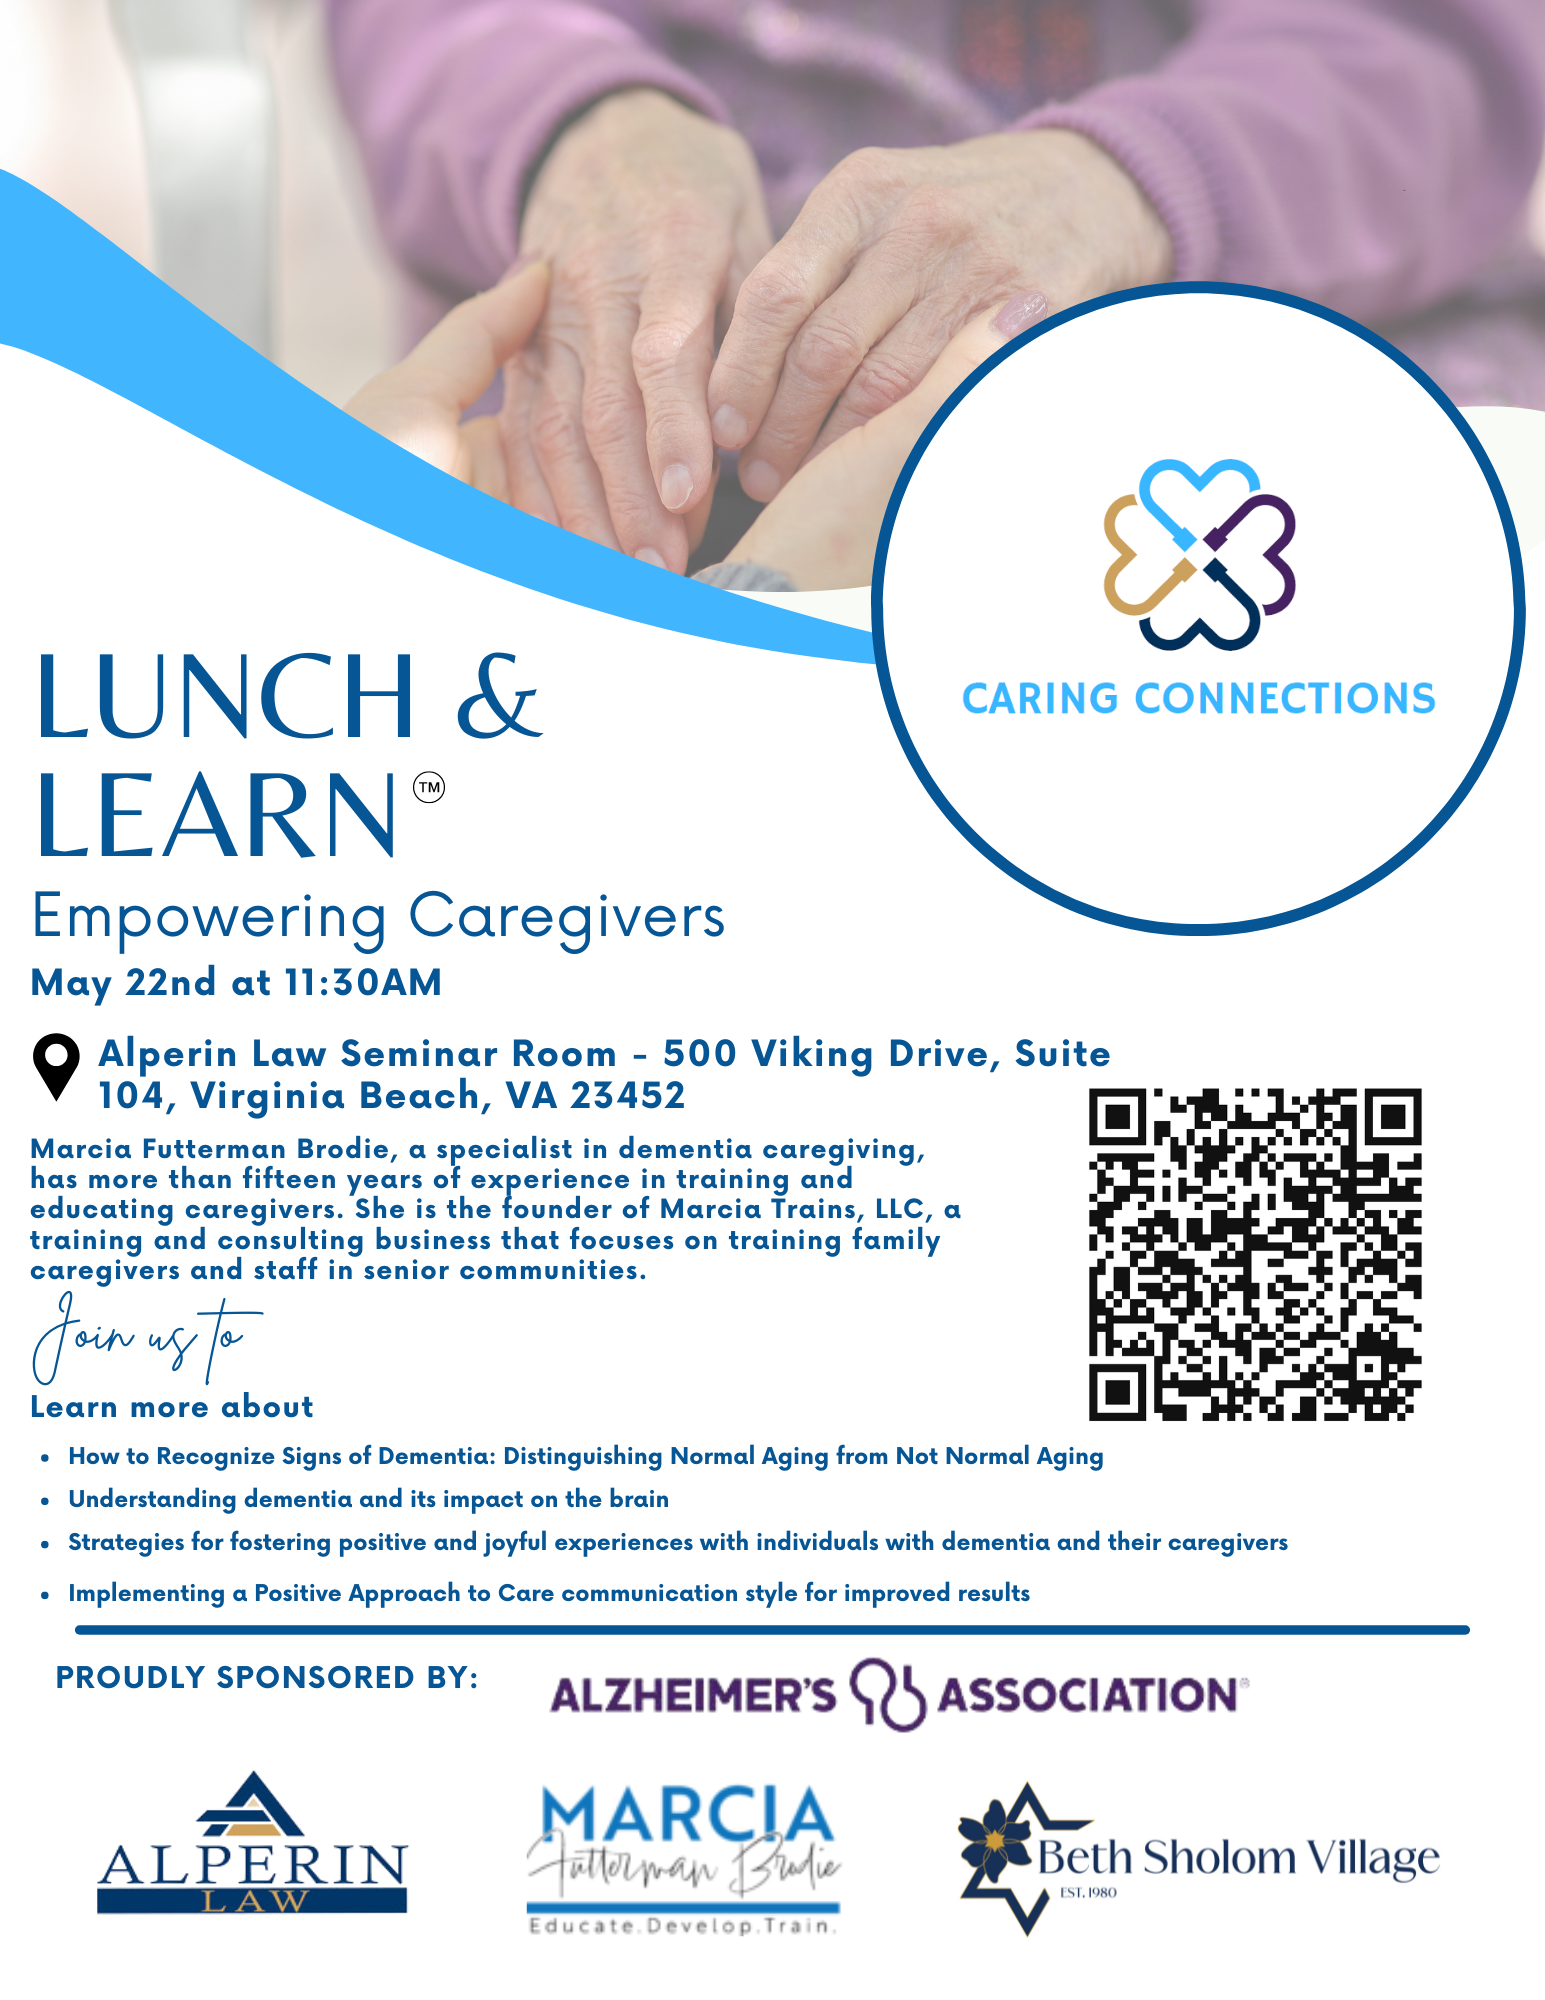 Empowering Caregivers Lunch & Learn Flyer